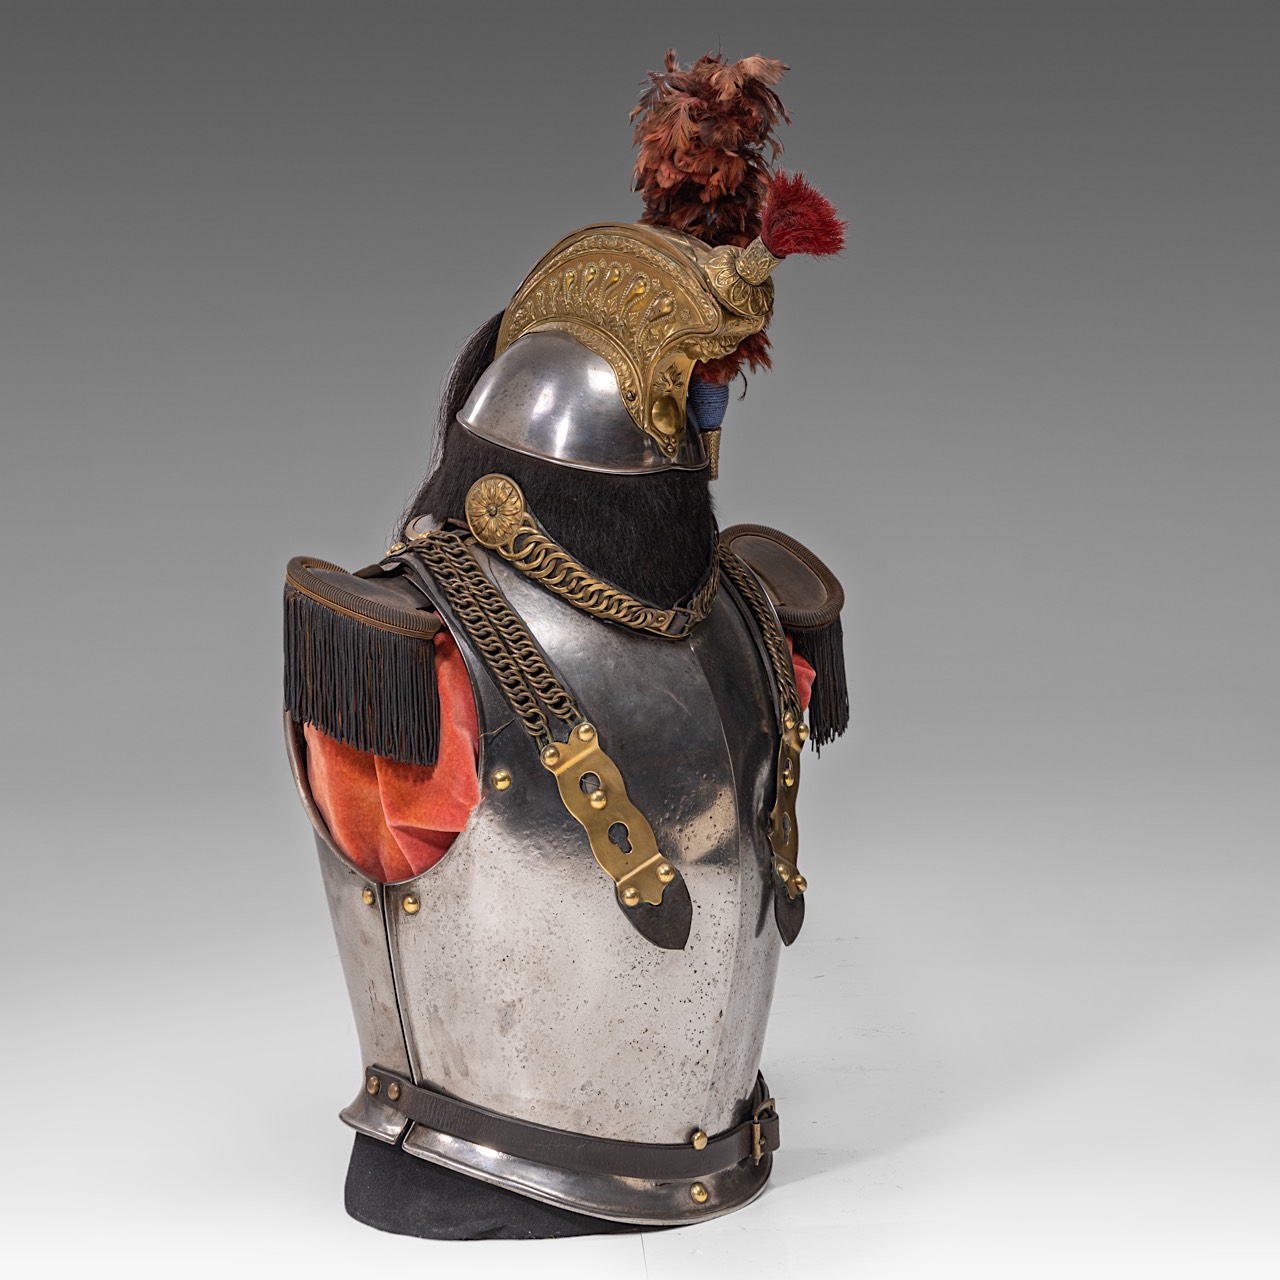 Cuirass and helmet ,metal and guilded brass, 1855, 88 x 42 x 54 cm. (34.6 x 16.5 x 21.2 in.) - Image 6 of 6